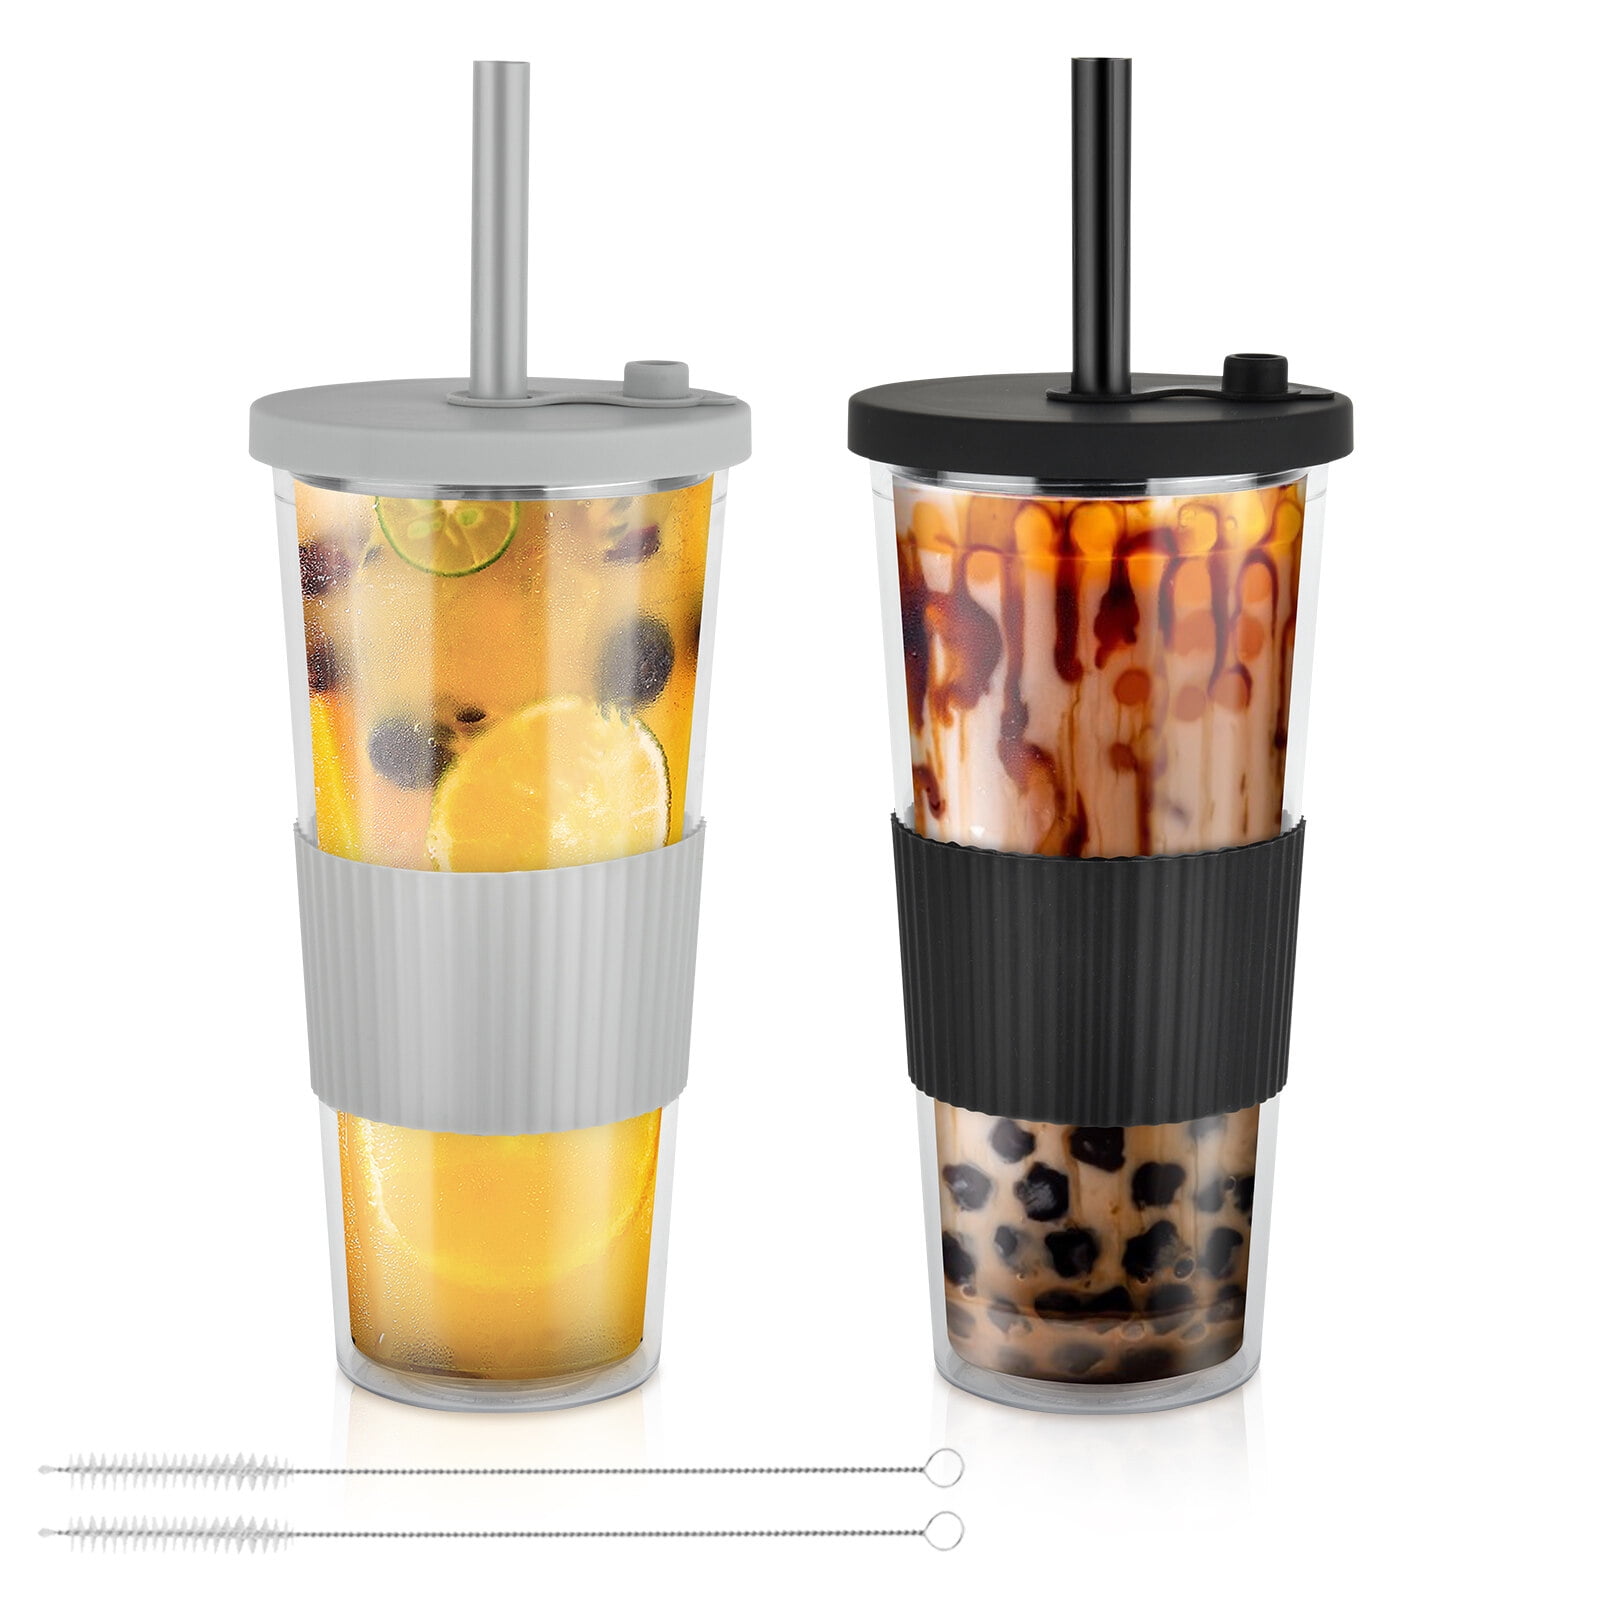 MCleanPin 24OZ Glass Cups with Lids and Straws,2 Pack Iced Coffee Cups with  Lids,Reusable Boba Cups,…See more MCleanPin 24OZ Glass Cups with Lids and